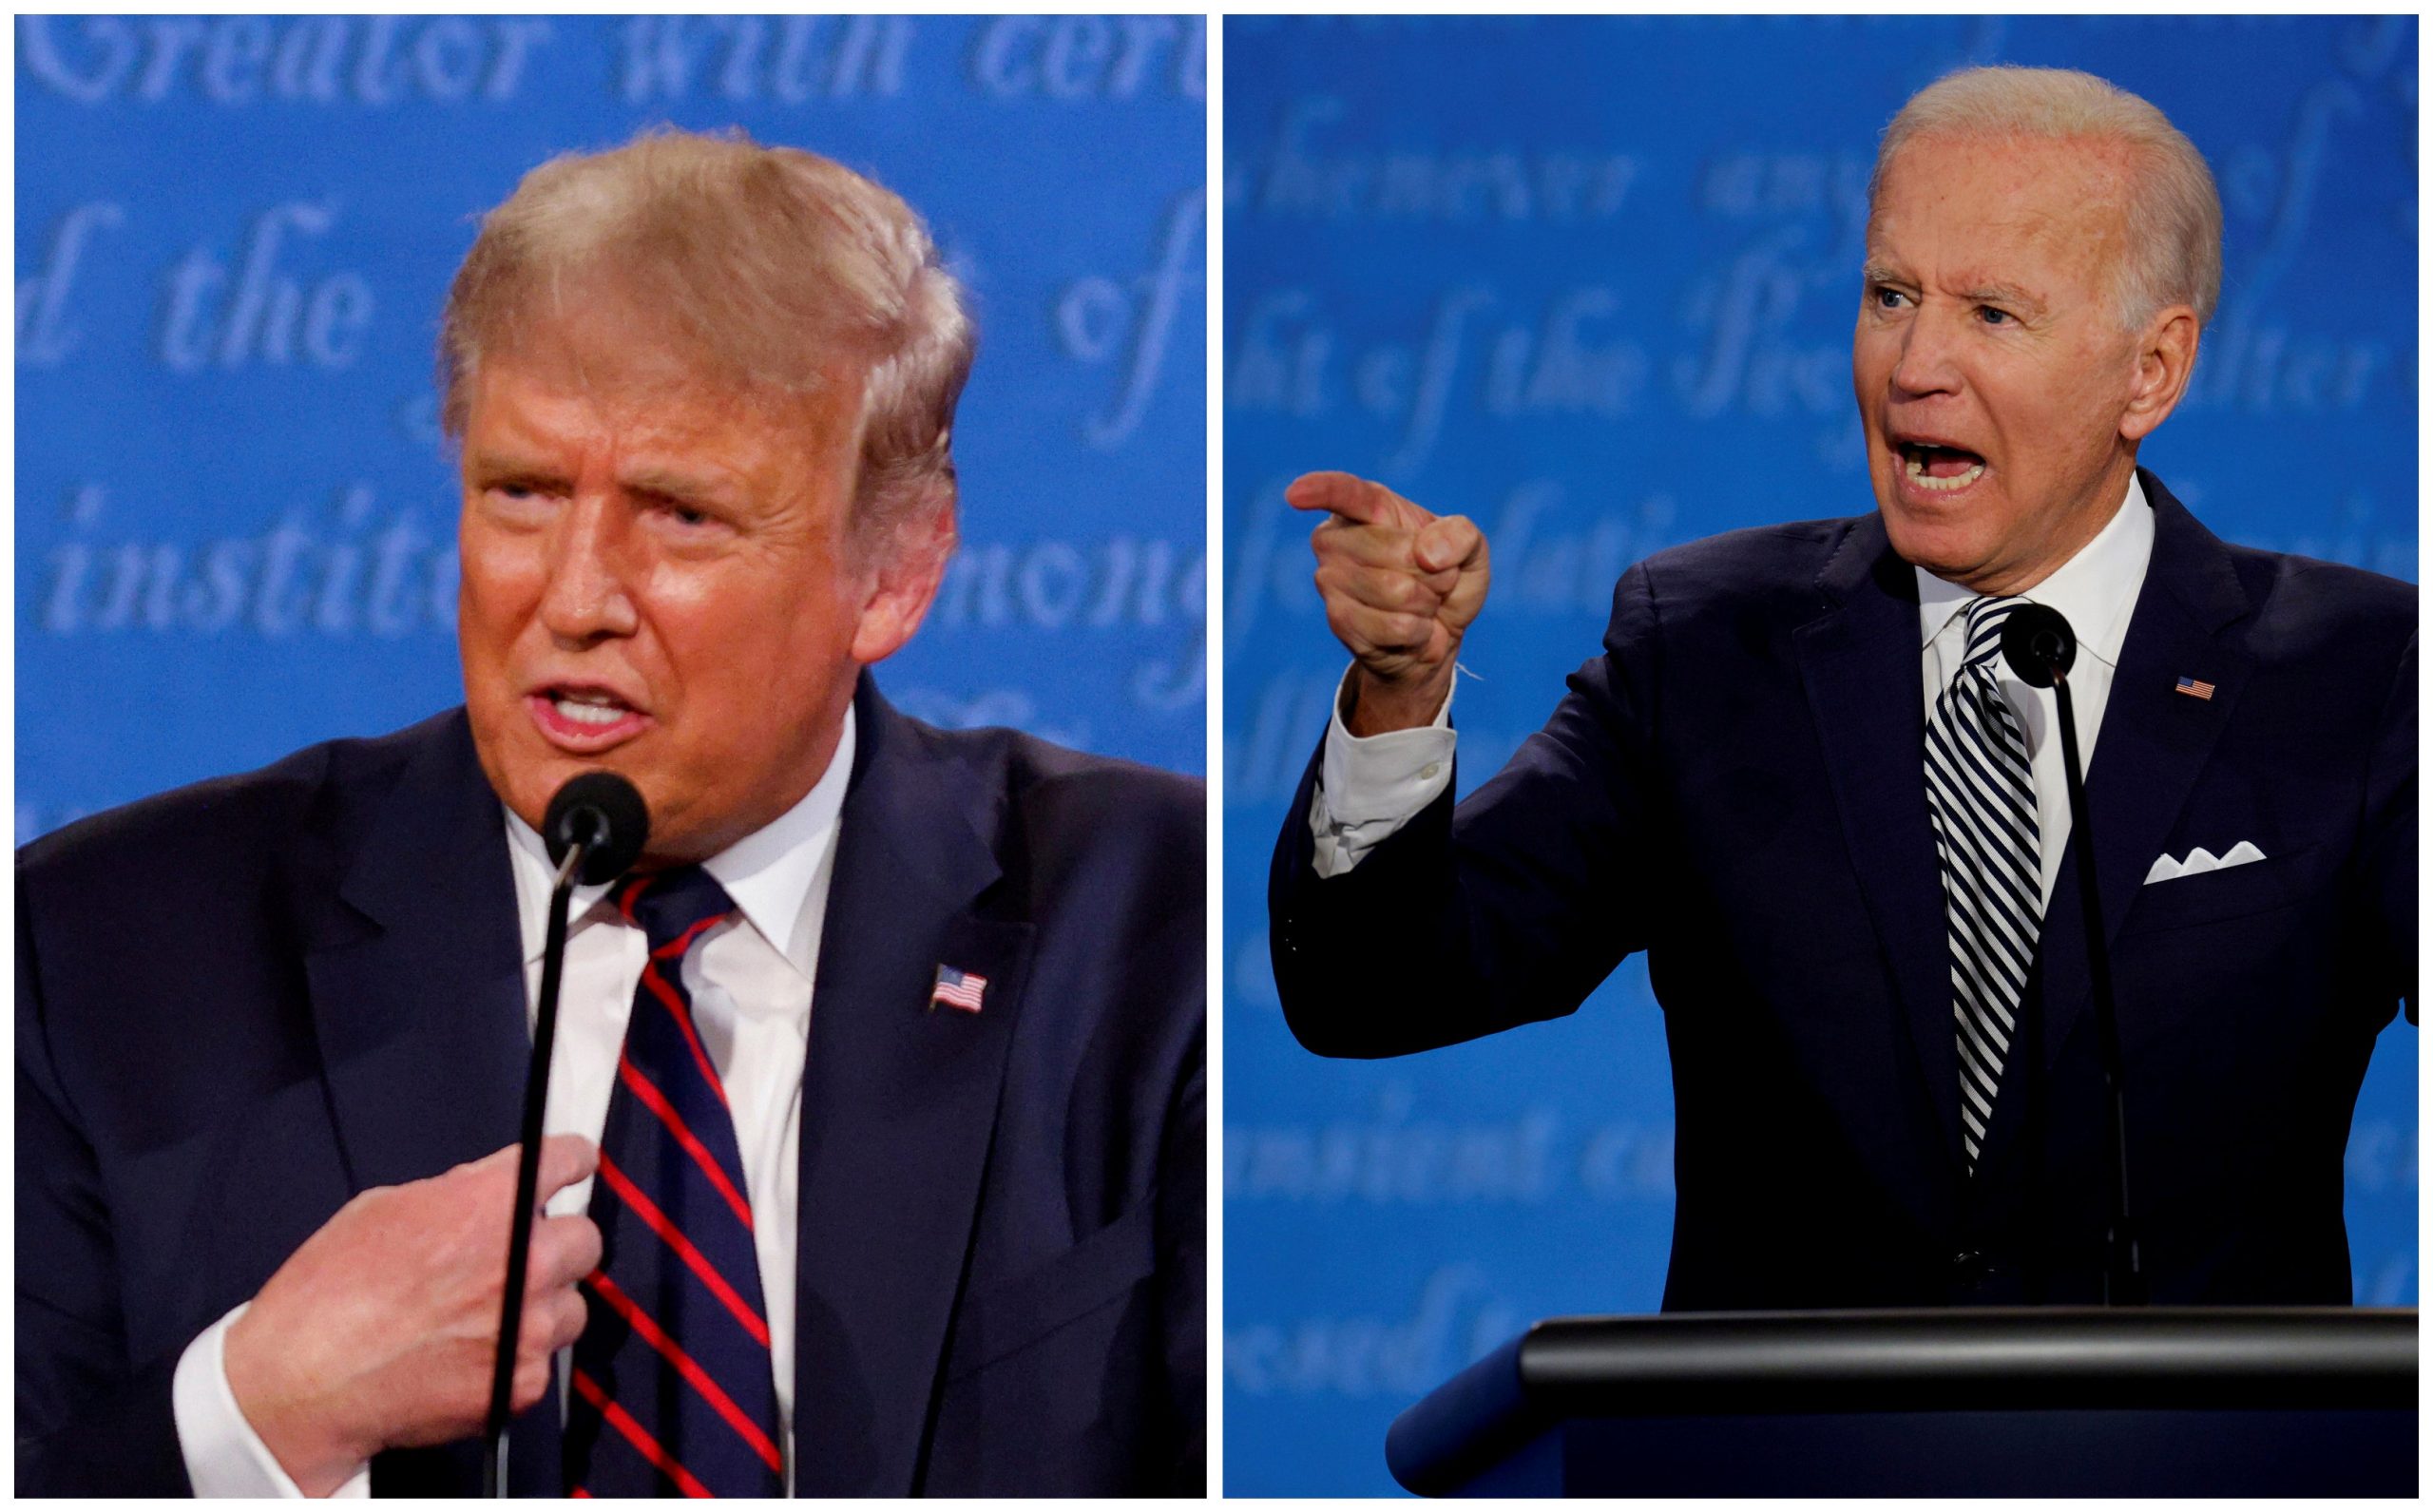 Debate news live: updates, fact-checking, and reactions after confronting Trump and Biden head-on